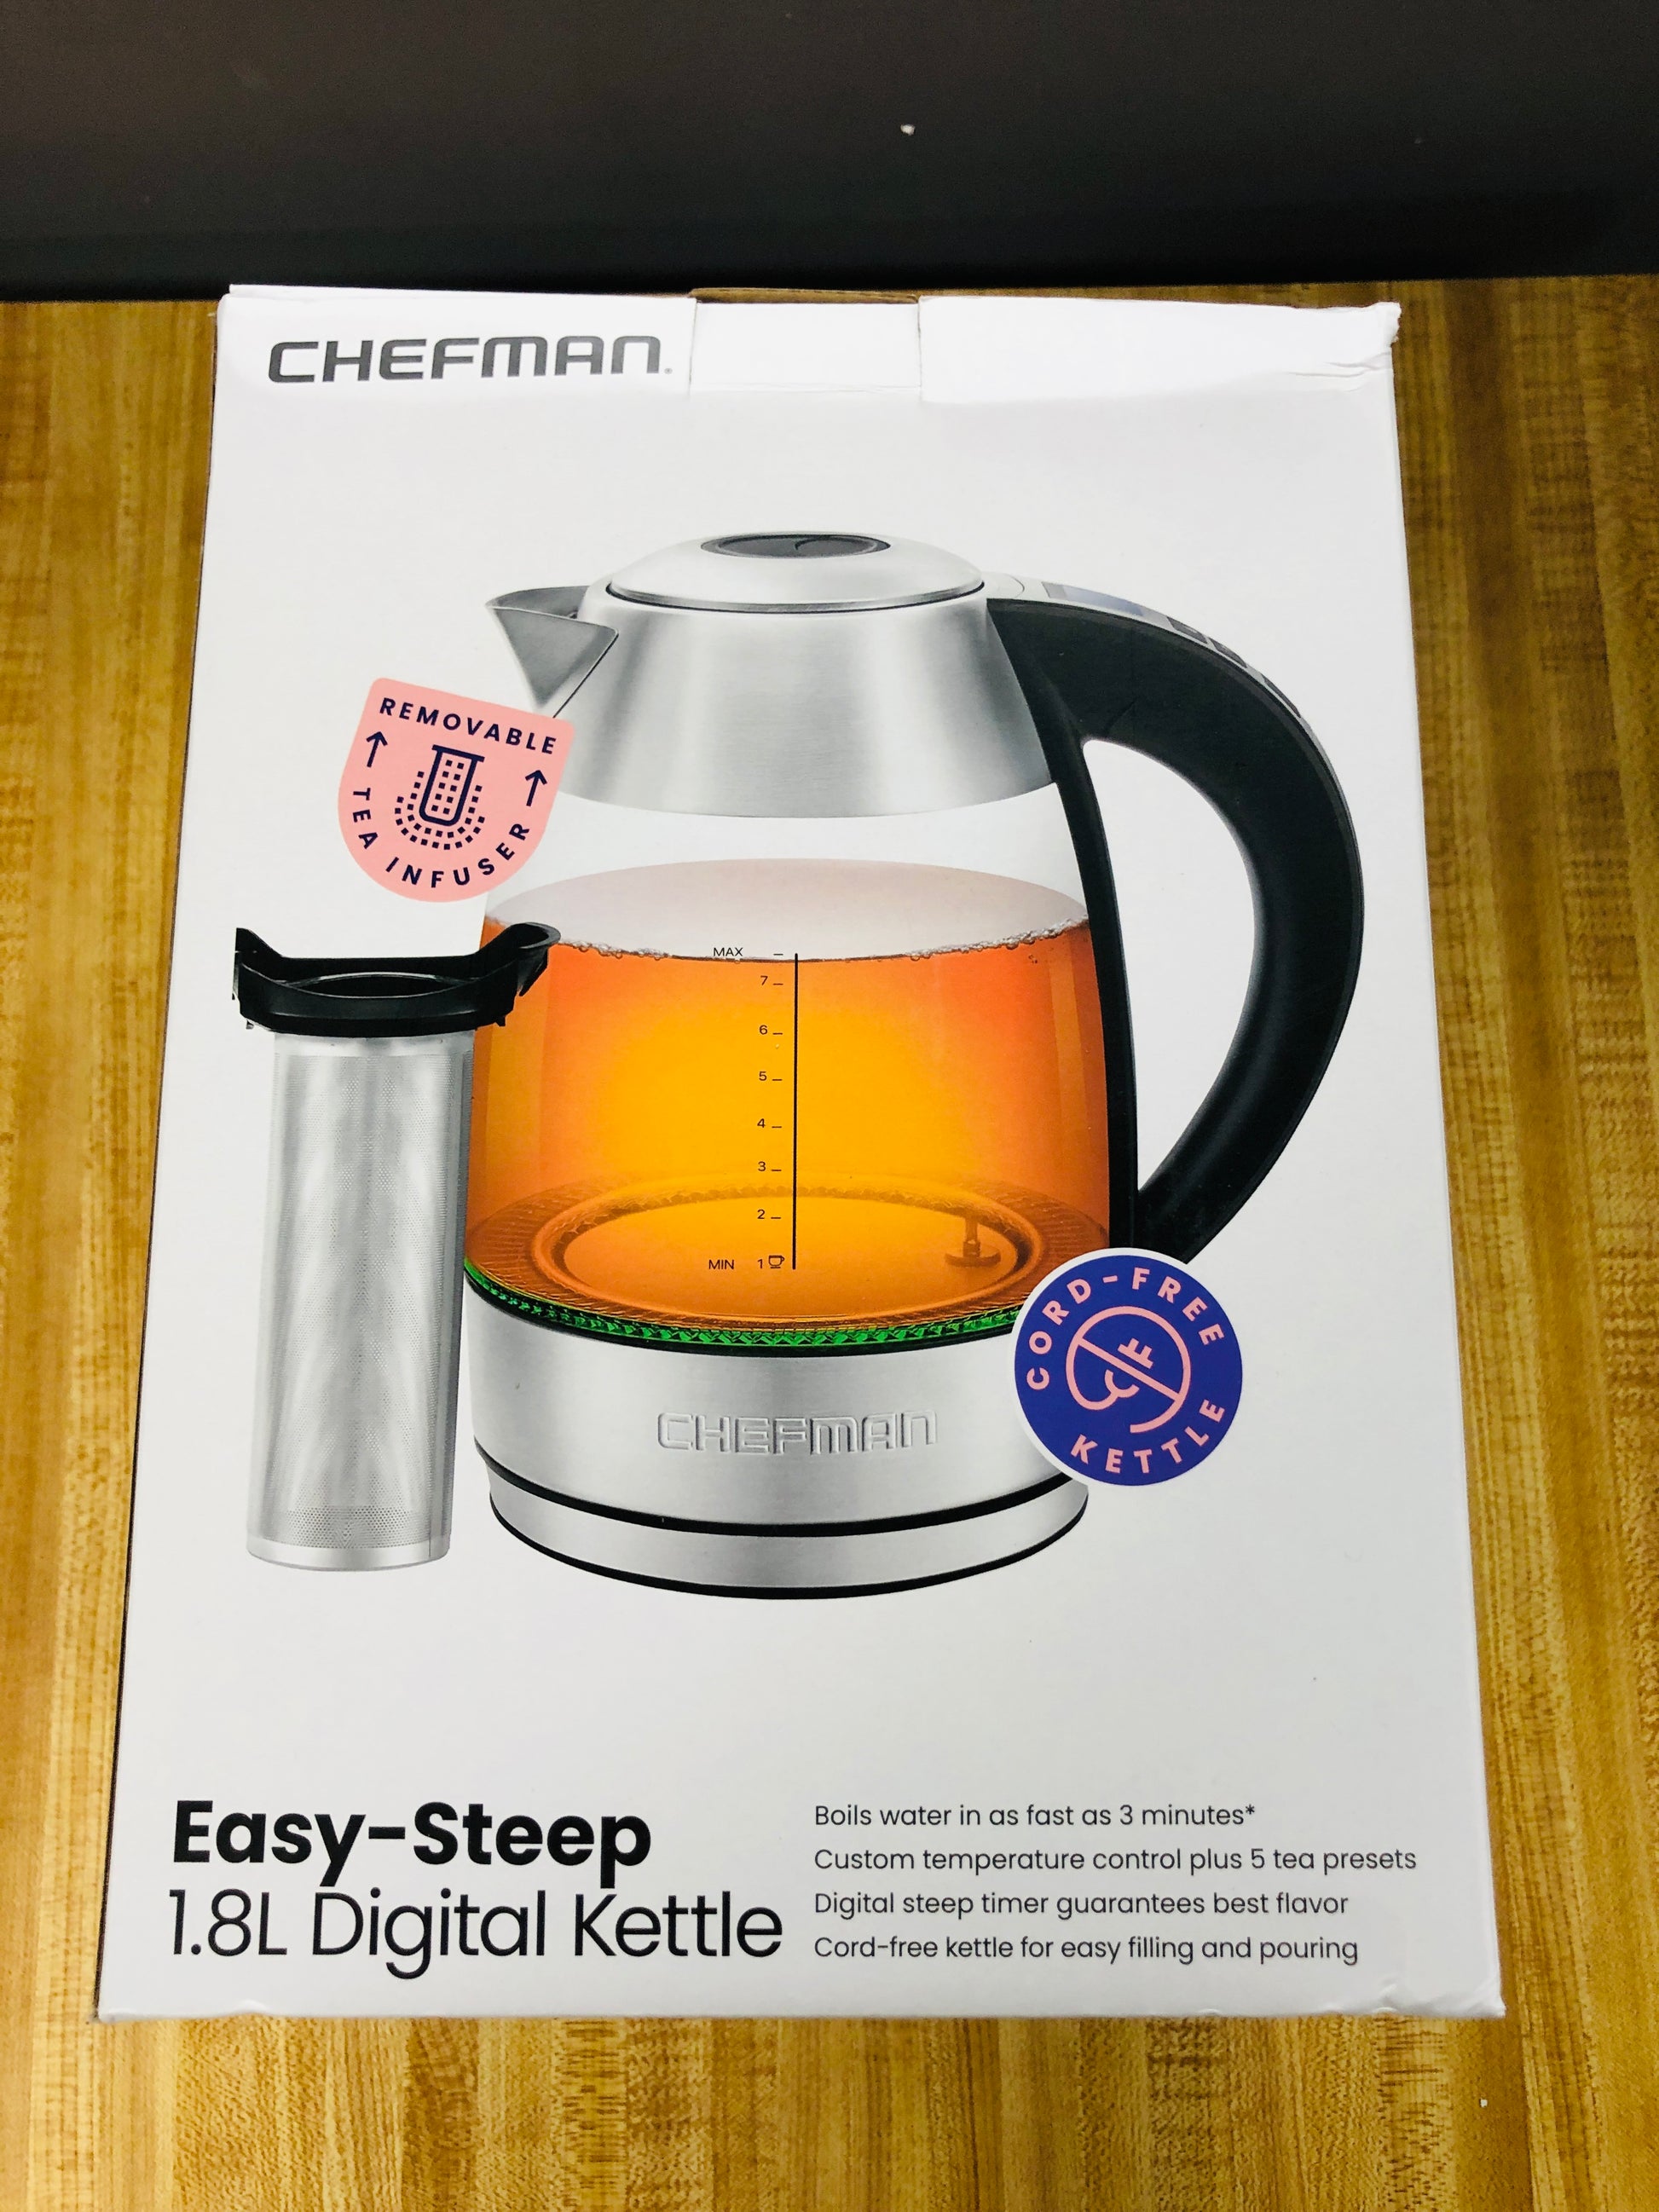 Chefman Electric Glass Kettle W/ Tea Infuser, Stainless Steel, 1.8 Liters